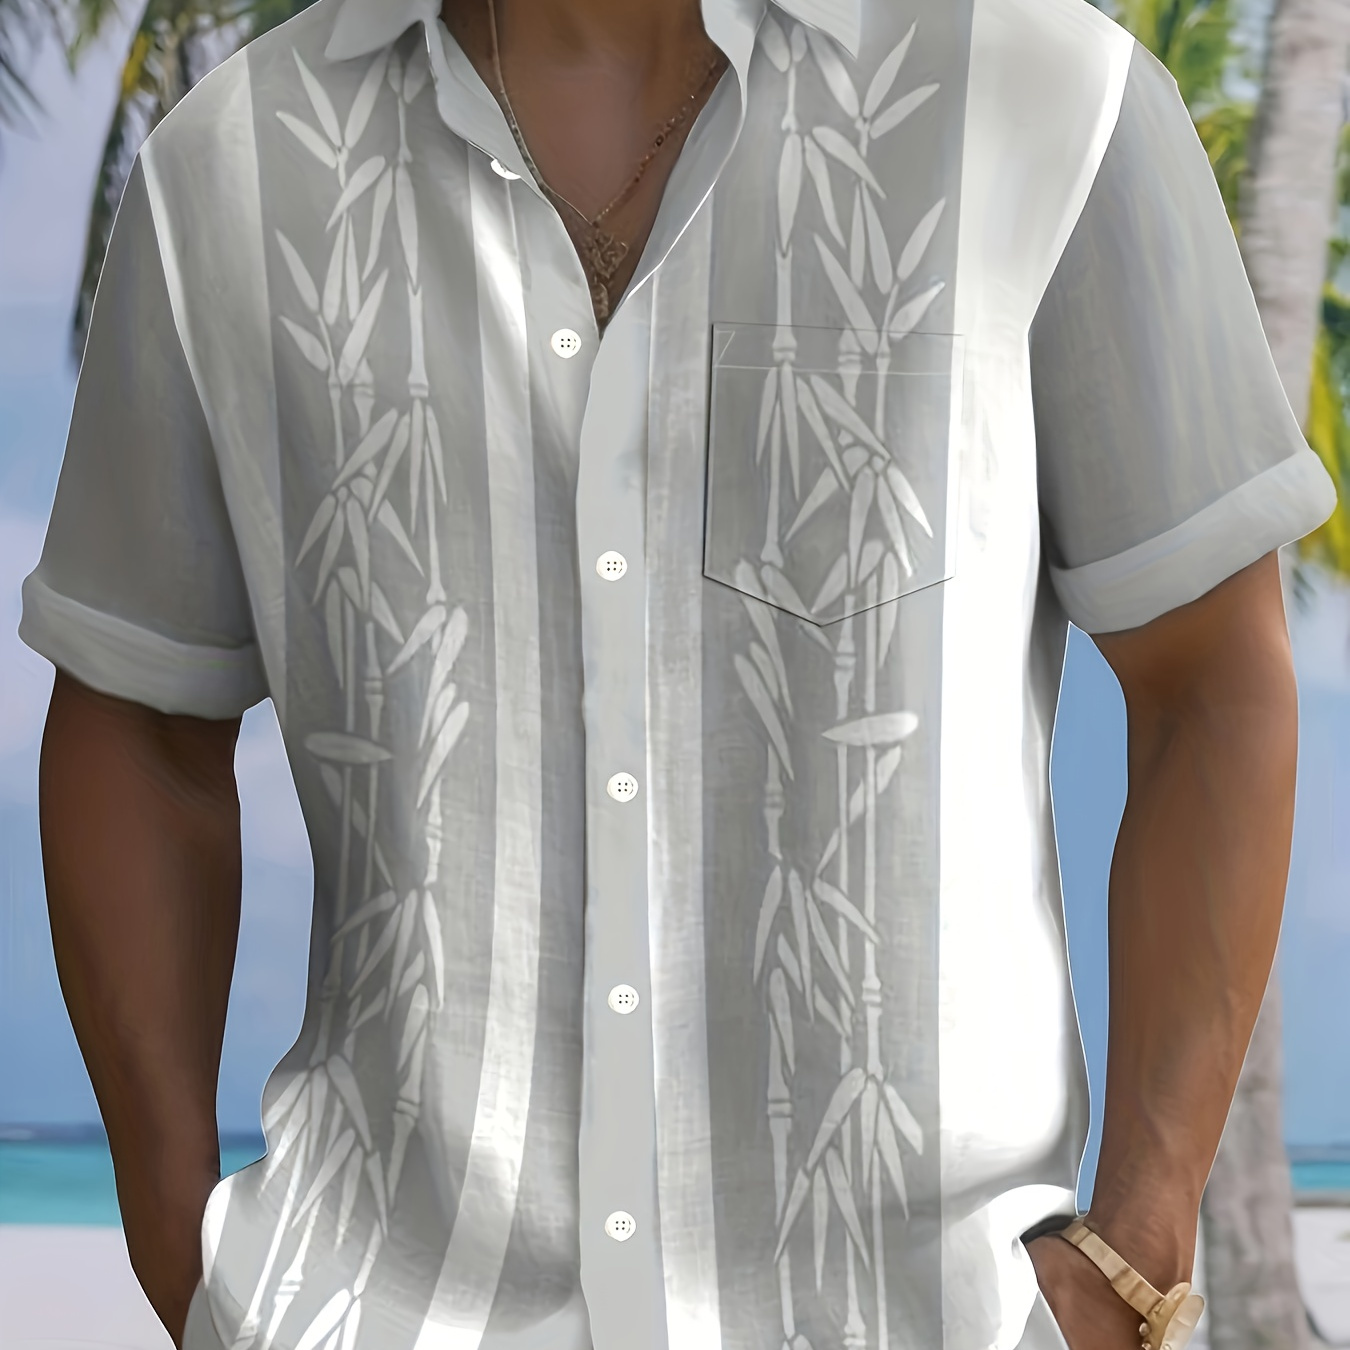 

Plus Size Men's Bamboo Graphic Print Shirt For Summer, Contrast Color Short Sleeve Shirt For Males